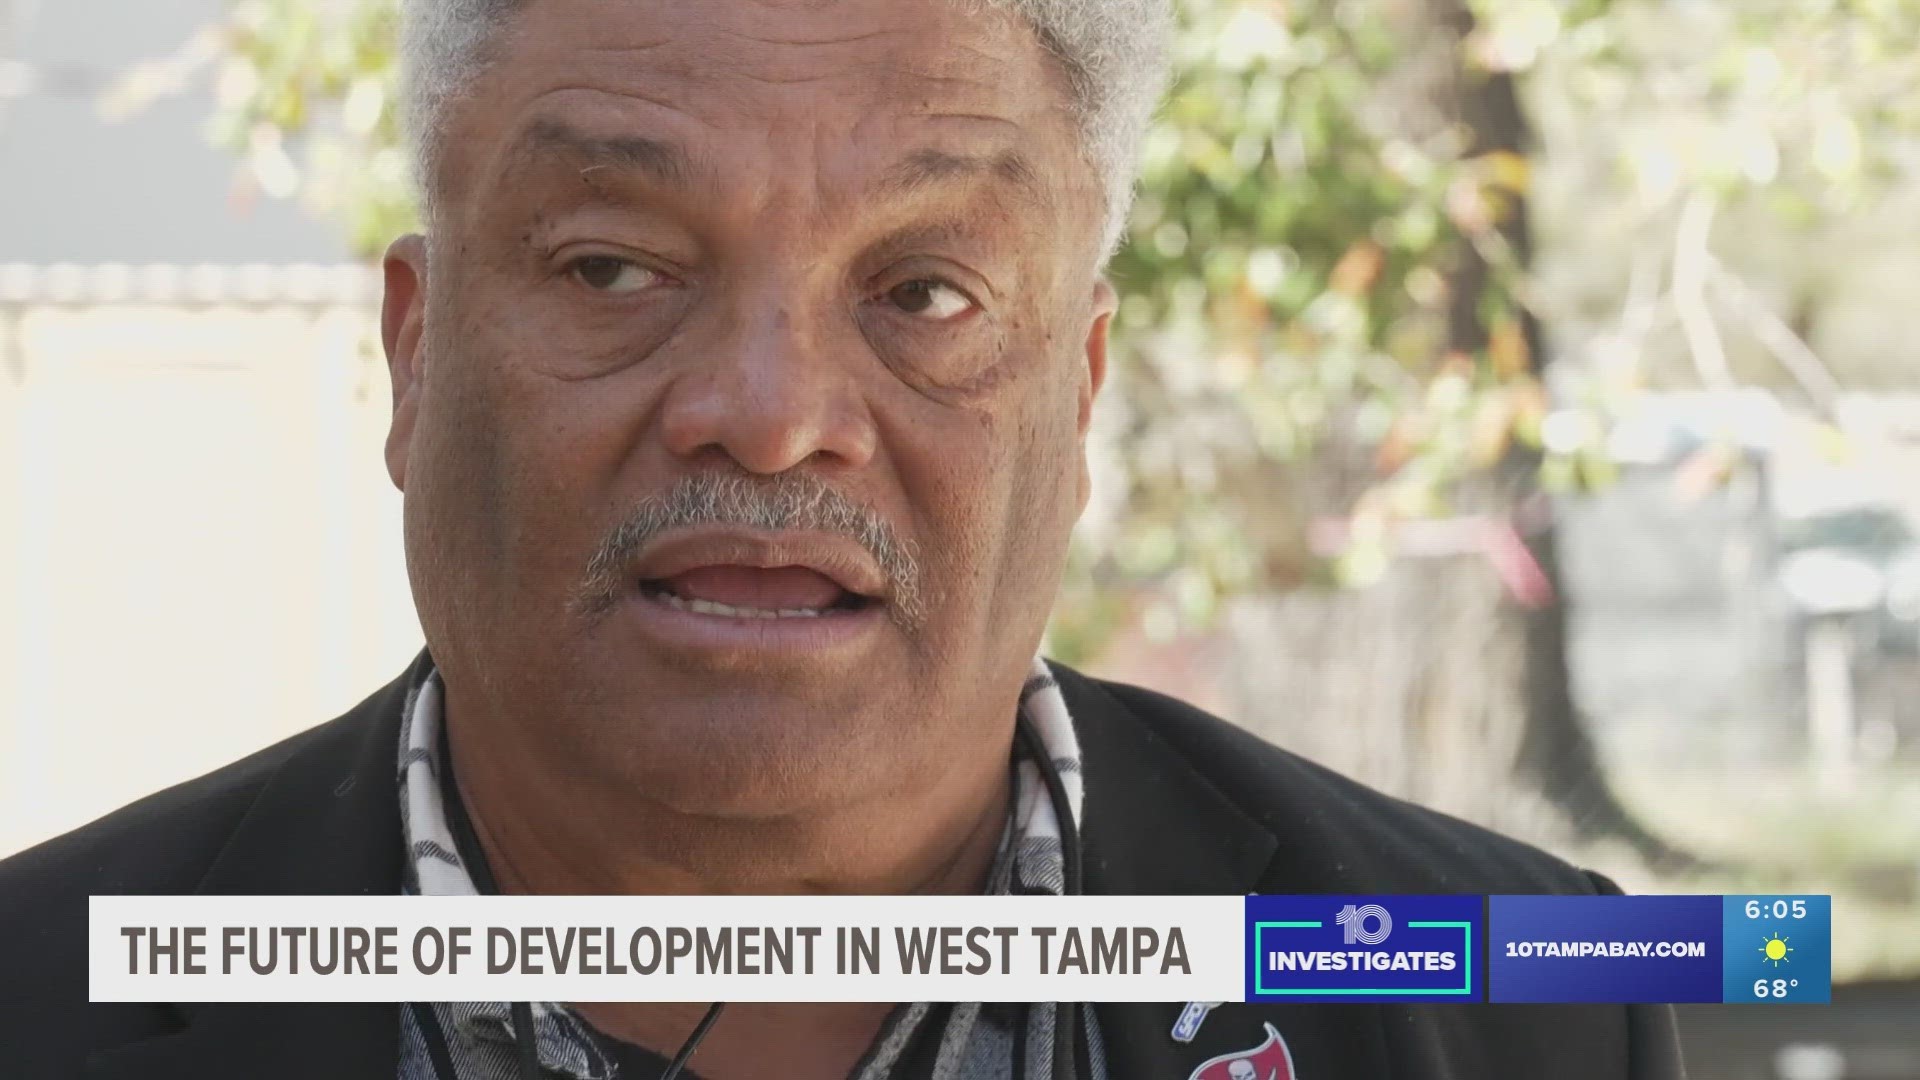 For years, the city has been working to transform a section of West Tampa.